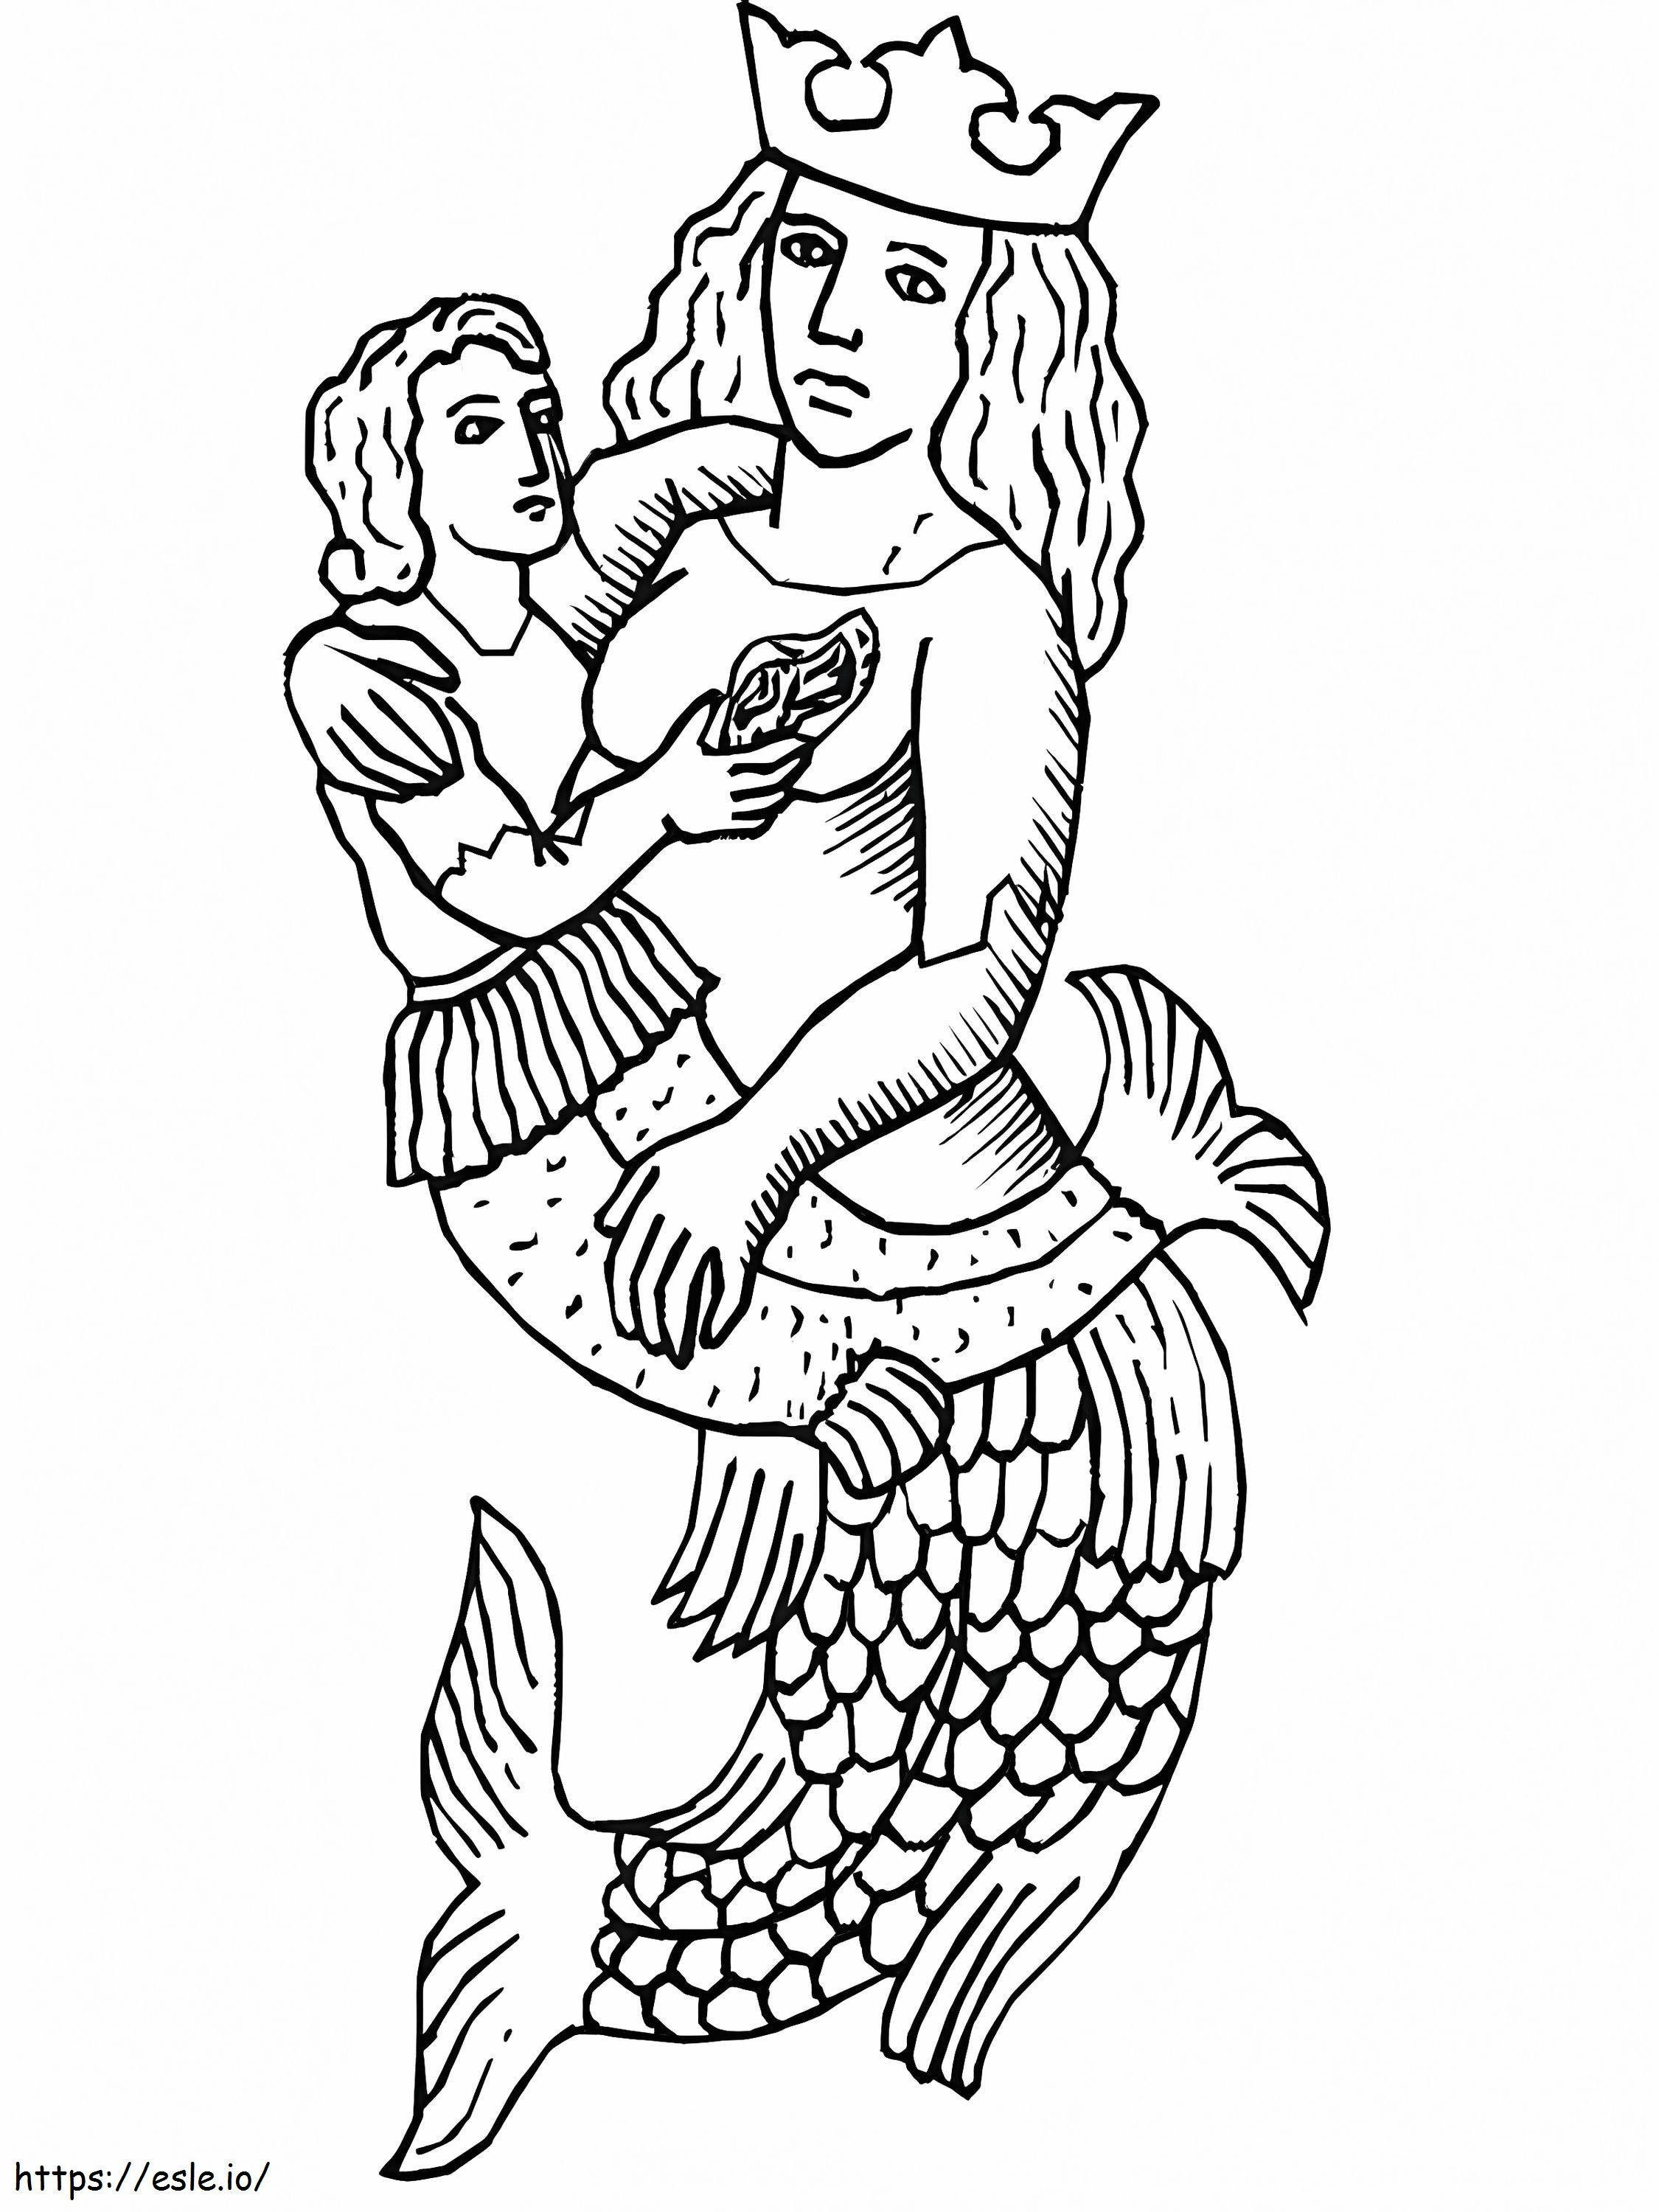 Mermaids Statue coloring page